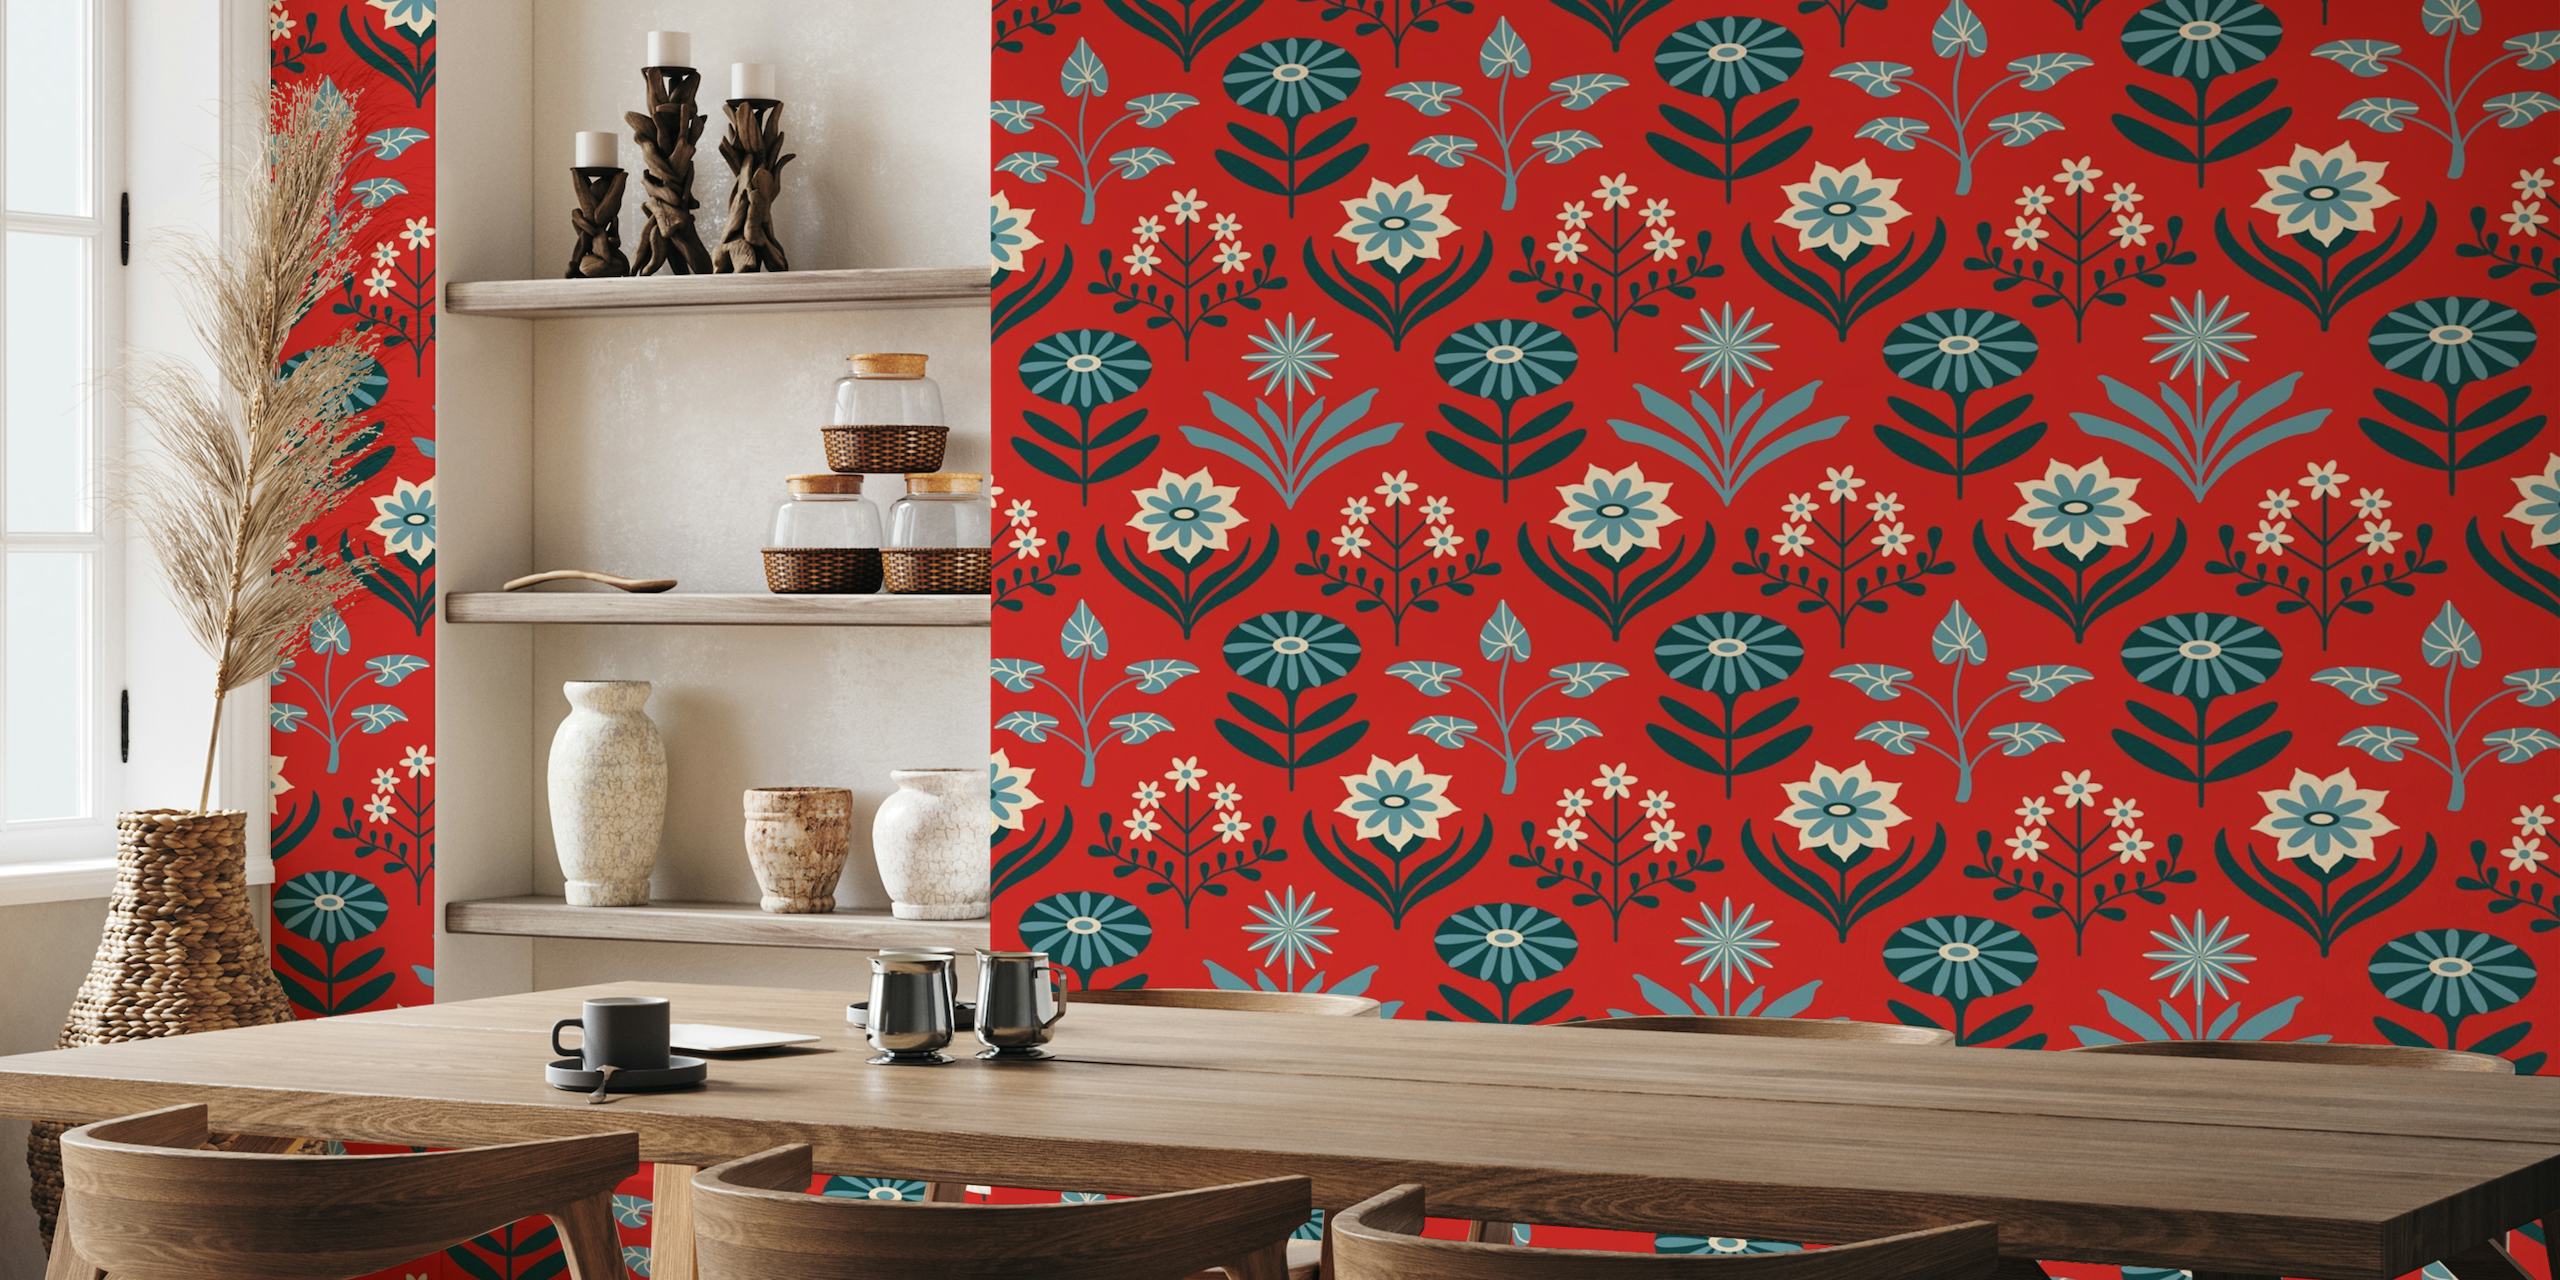 Mid-century Scandinavian-inspired floral patterns on a deep red background wall mural.